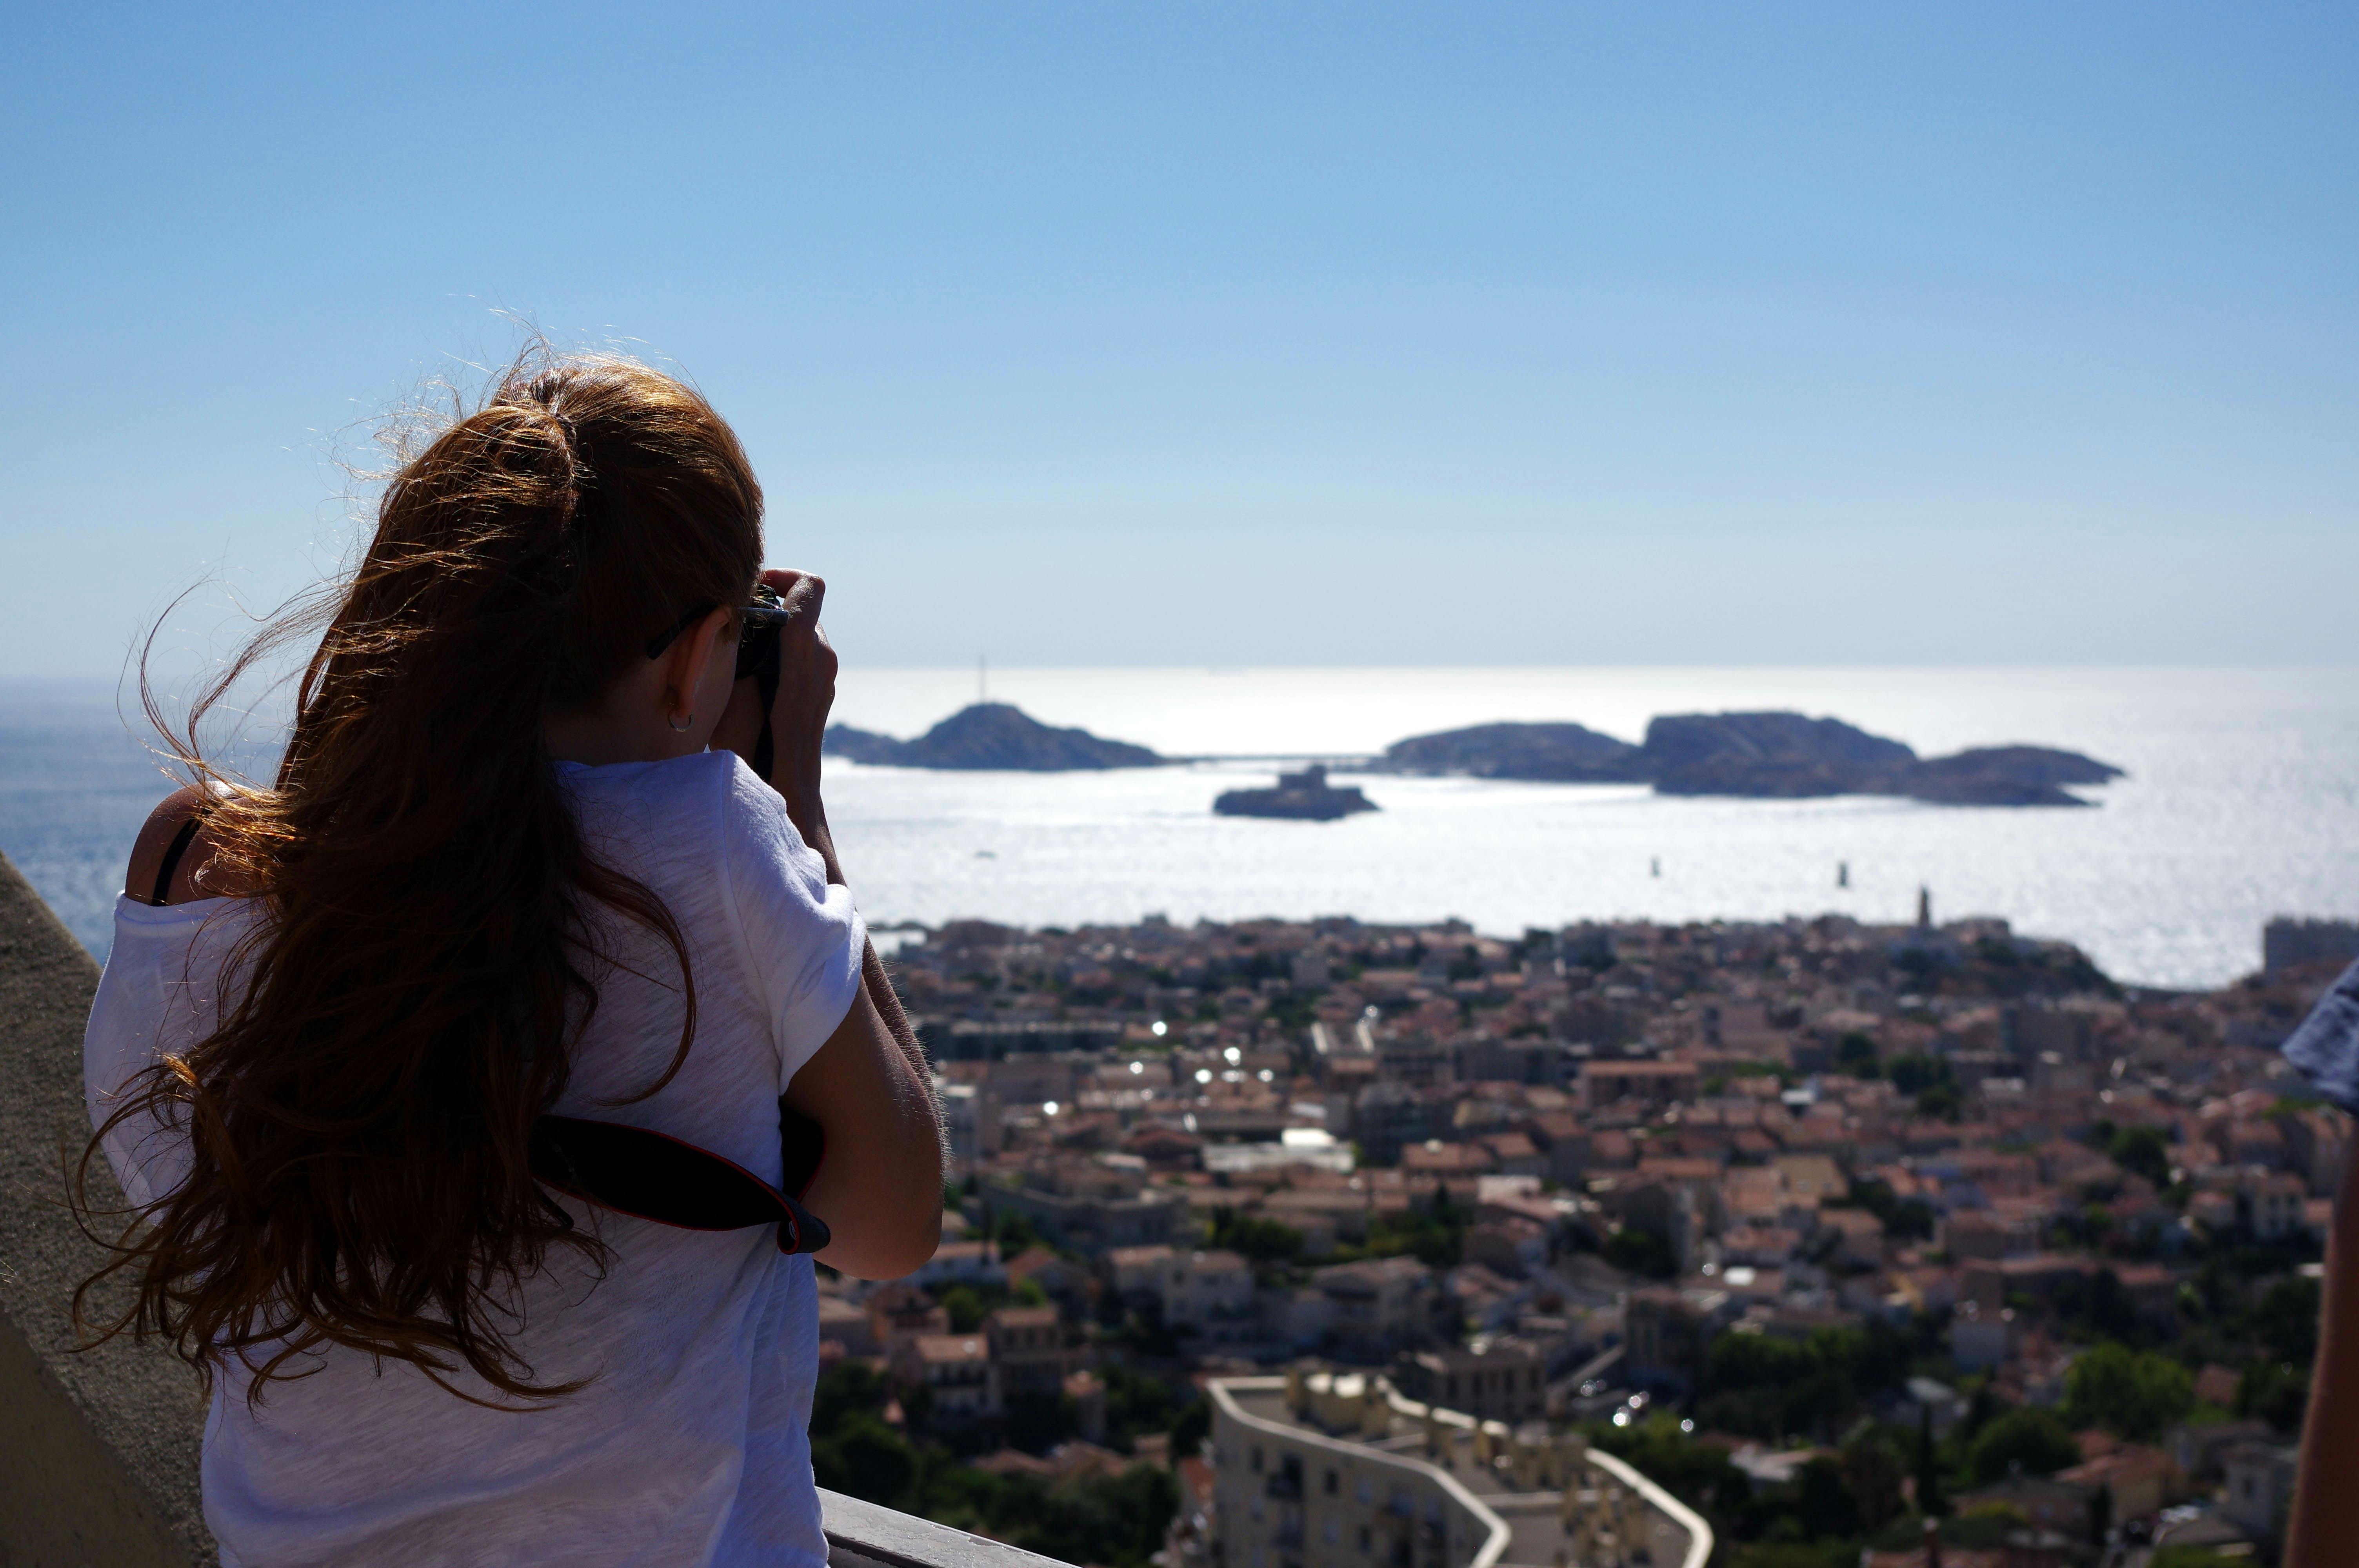 Photography workshop tour in Marseille